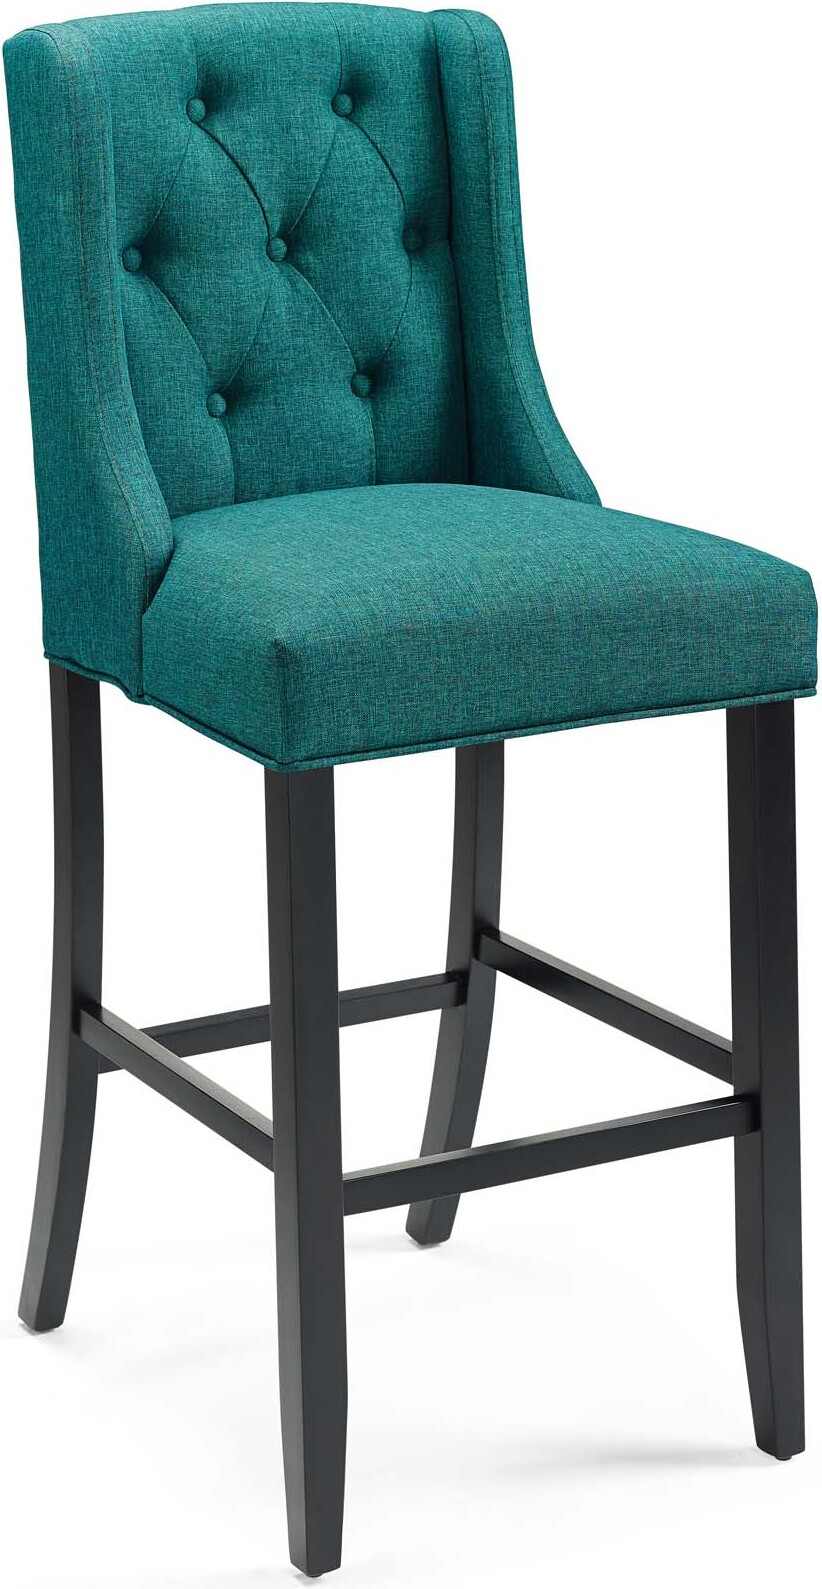 Baronet Teal Tufted On Upholstered, Tufted Fabric Bar Stools